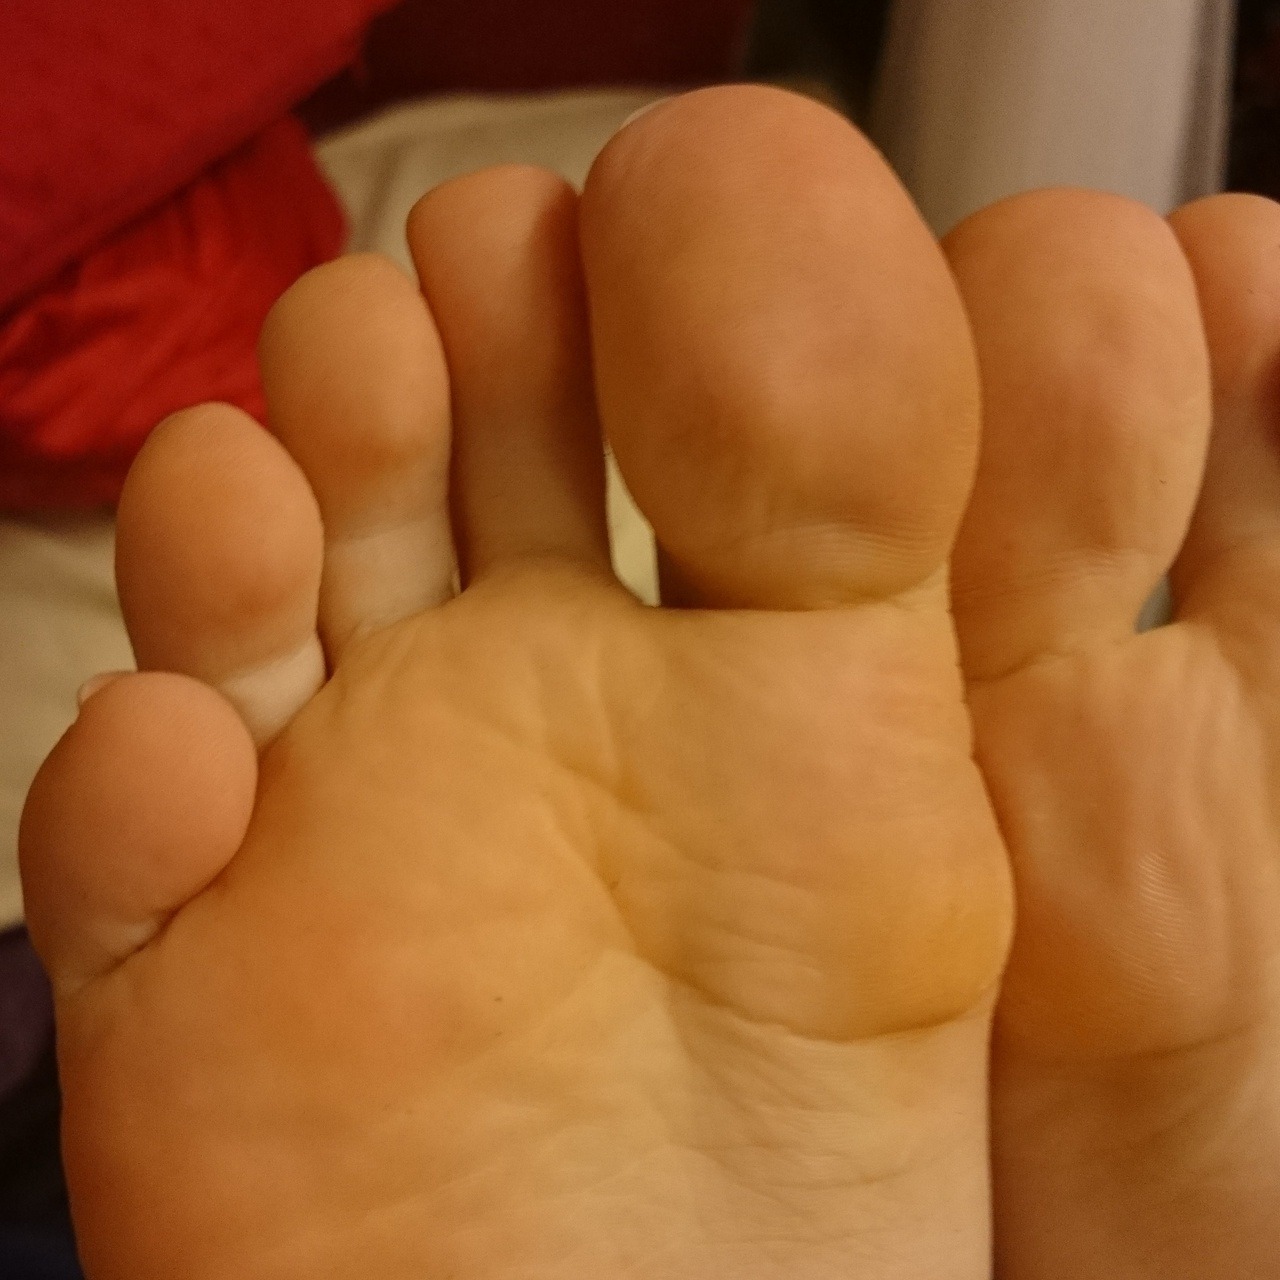 foot-fetish-babes:  Here are some toes for you to suck on while having sweet Dreams